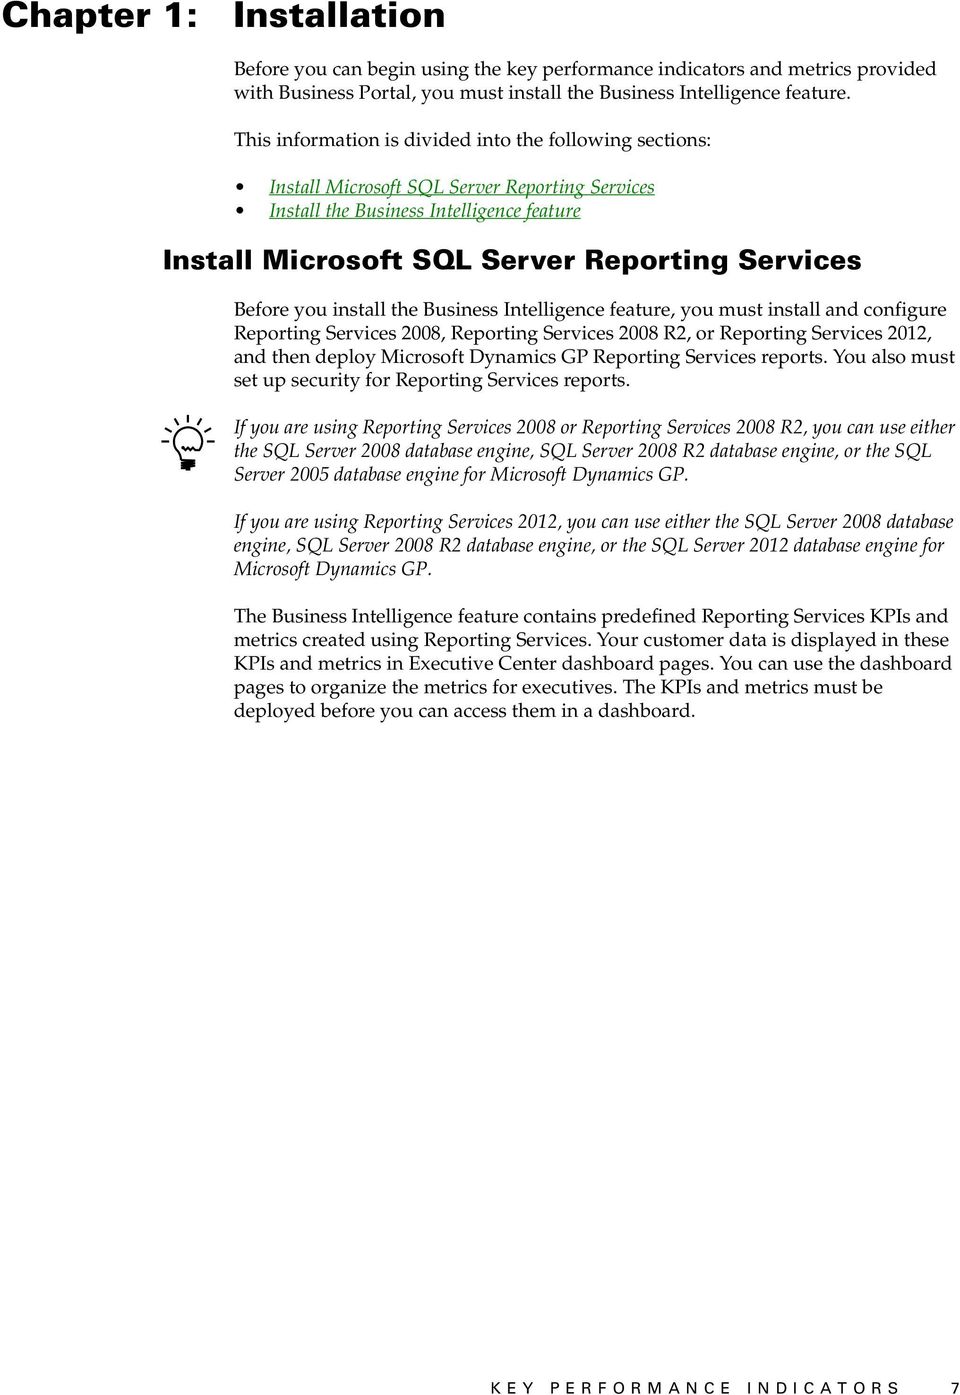 Before you install the Business Intelligence feature, you must install and configure Reporting Services 2008, Reporting Services 2008 R2, or Reporting Services 2012, and then deploy Microsoft